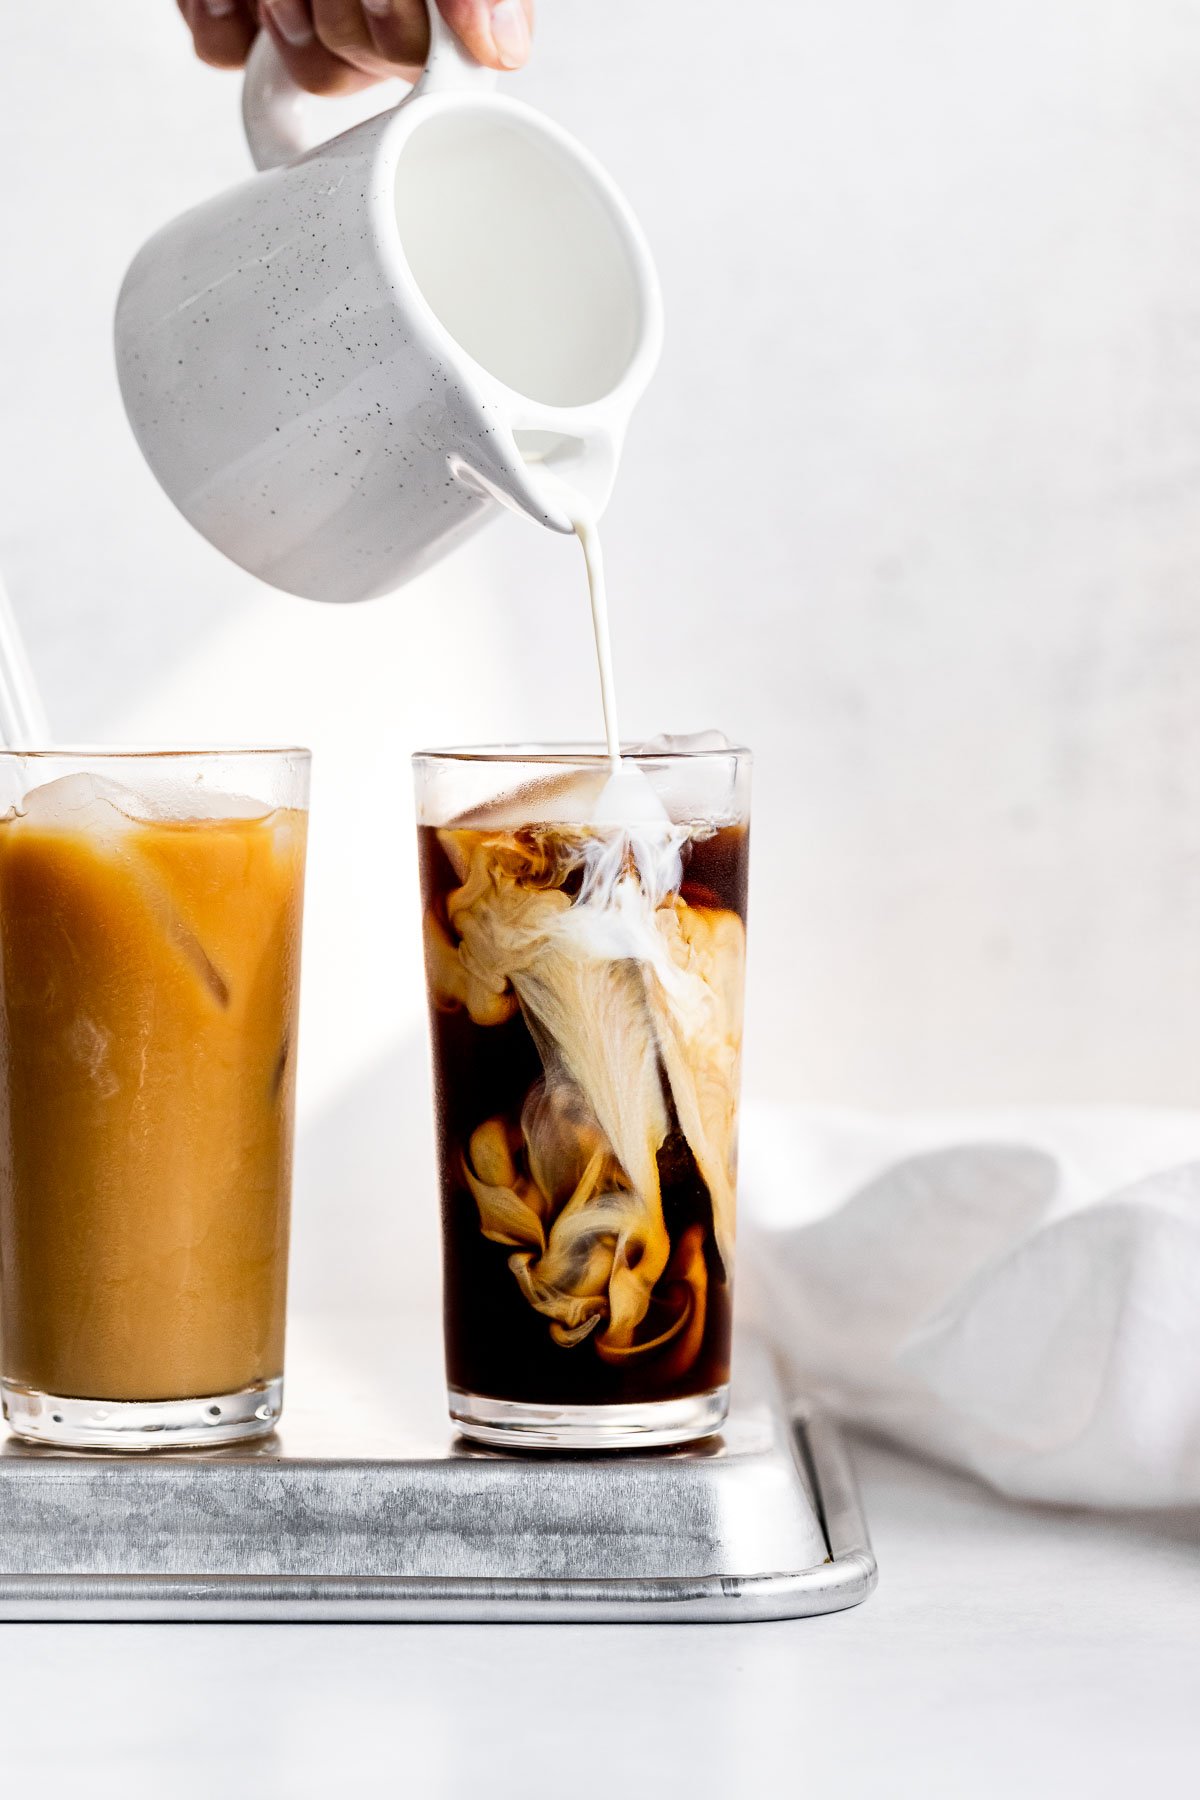 How Can You Make Cold Brew Coffee at Home 